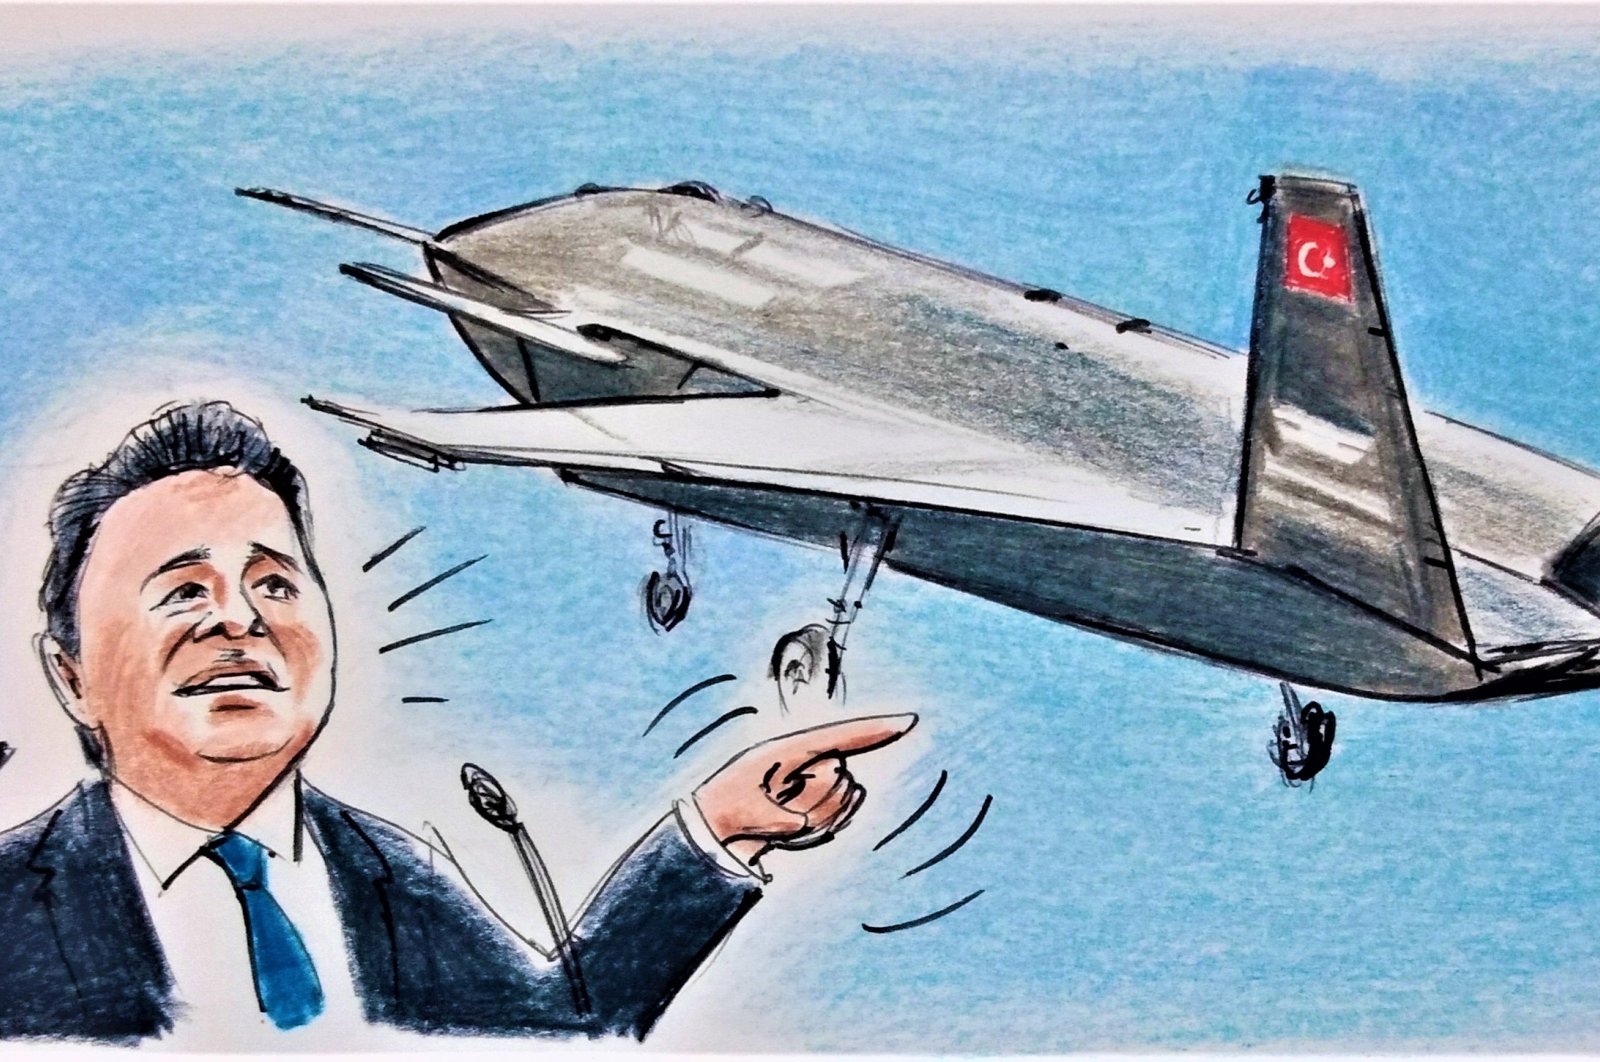 The Democracy and Progress Party (DEVA) Chiar Ali Babacan seems to try and target the government’s sources of good news: national defense, energy and technology. (Erhan Yalvaç Illustration)